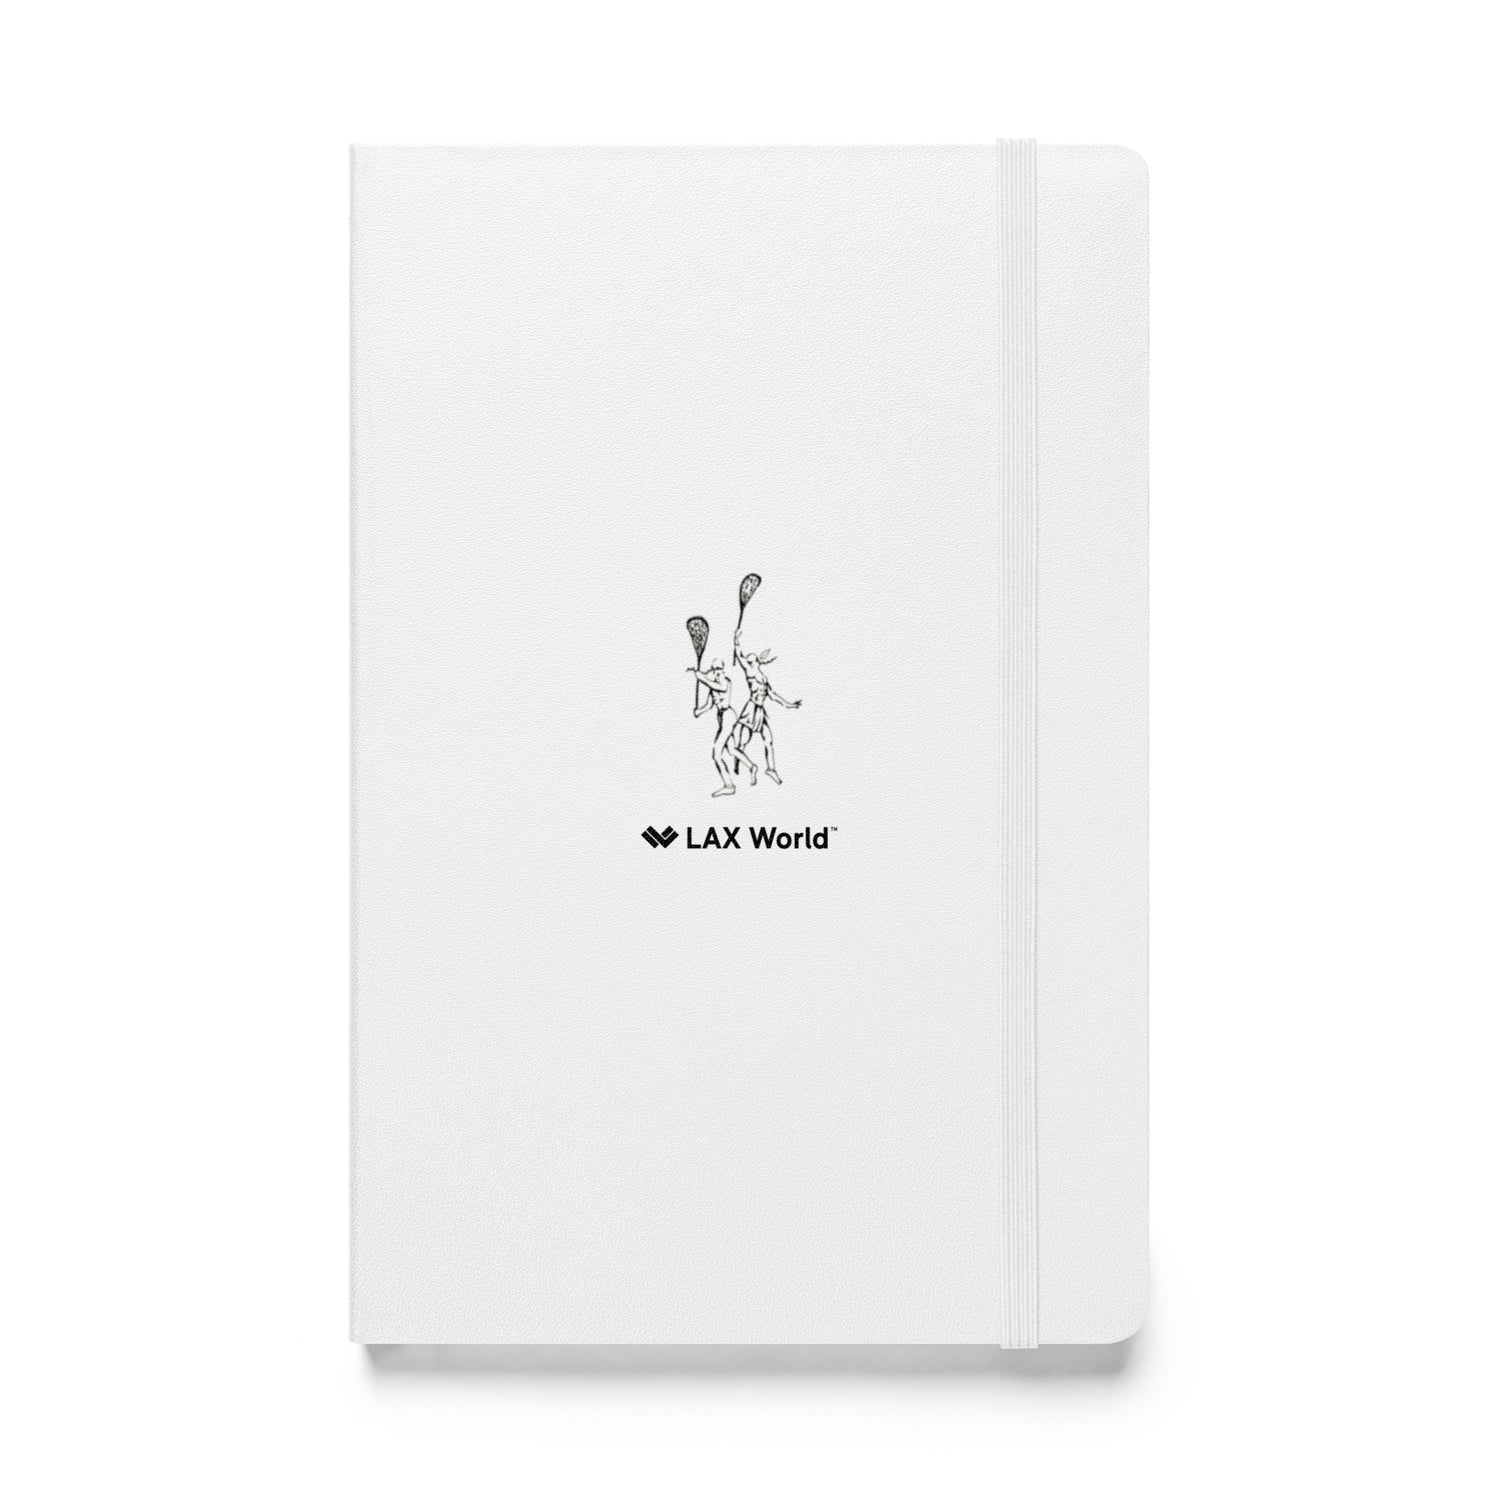 Klever Hardcover Bound Lacrosse Notebook - White Front 